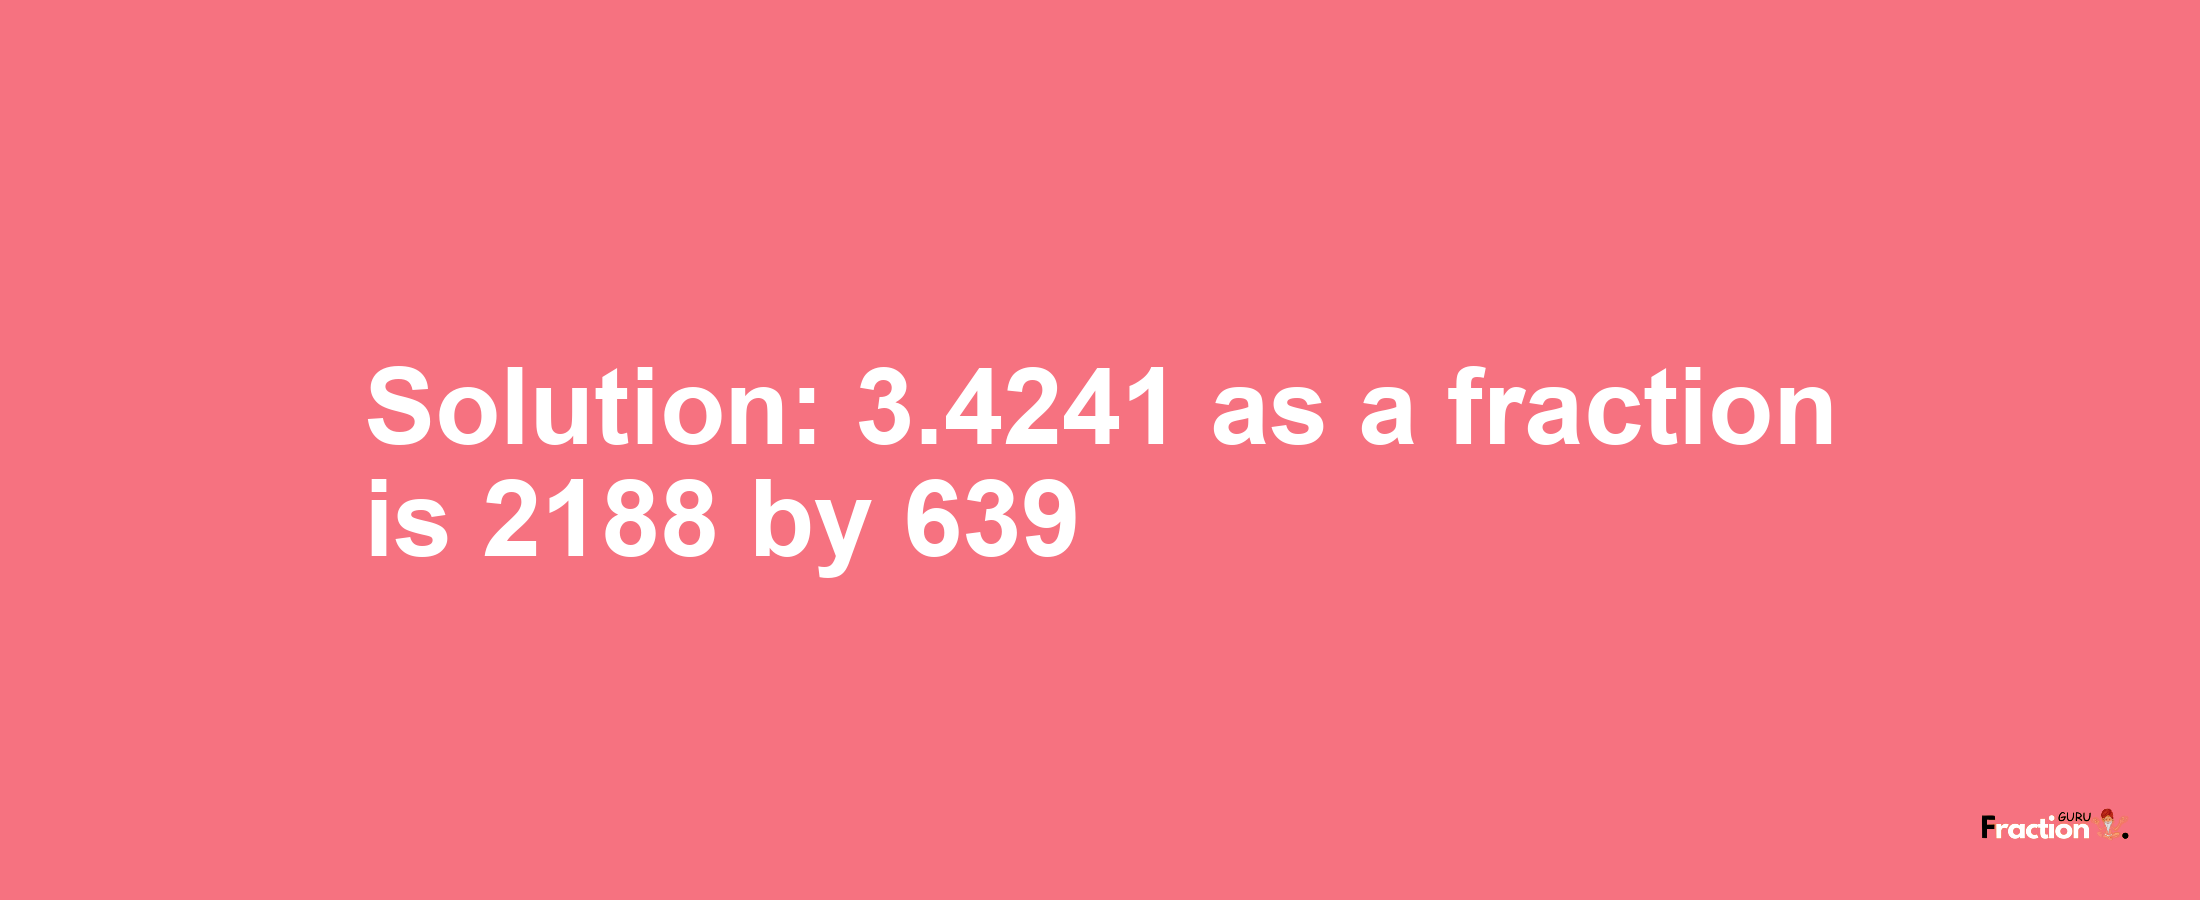 Solution:3.4241 as a fraction is 2188/639